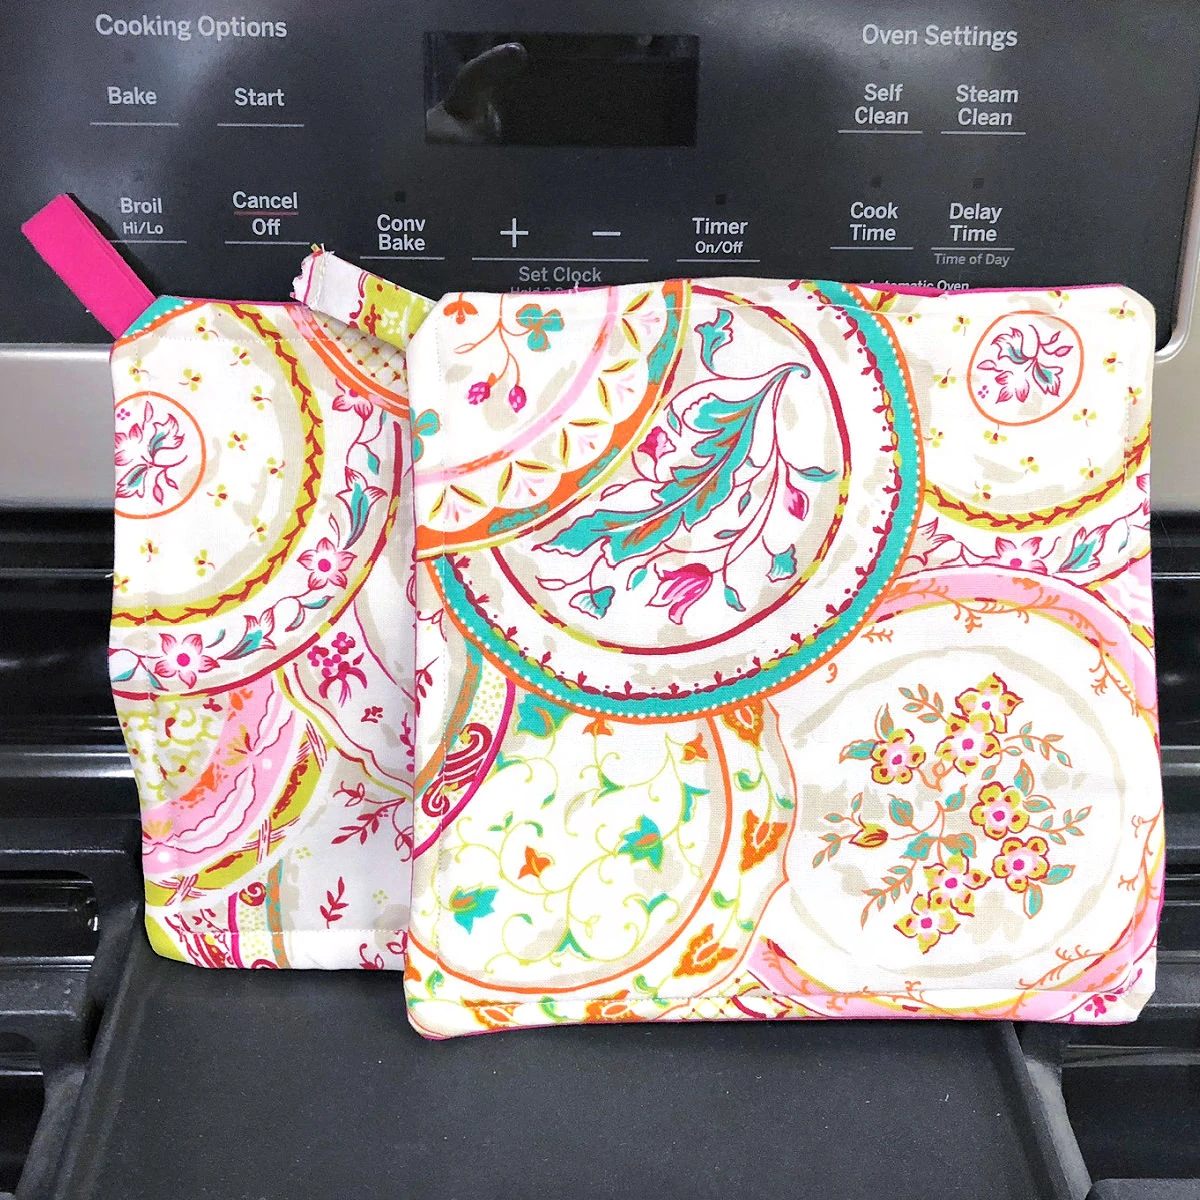 Two homemade paisley printed pot holders on an oven